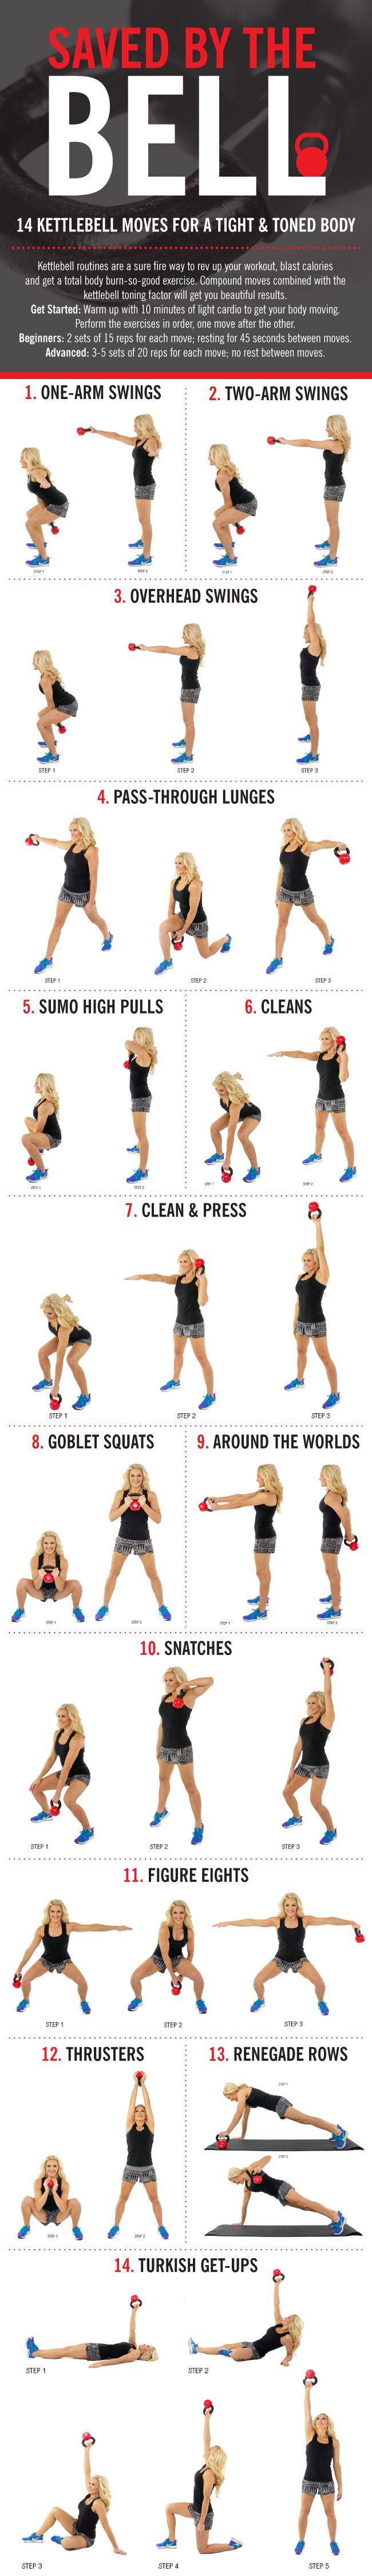 Wedding - 14 Kettlebell Moves For An All-over Body Calorie Torcher